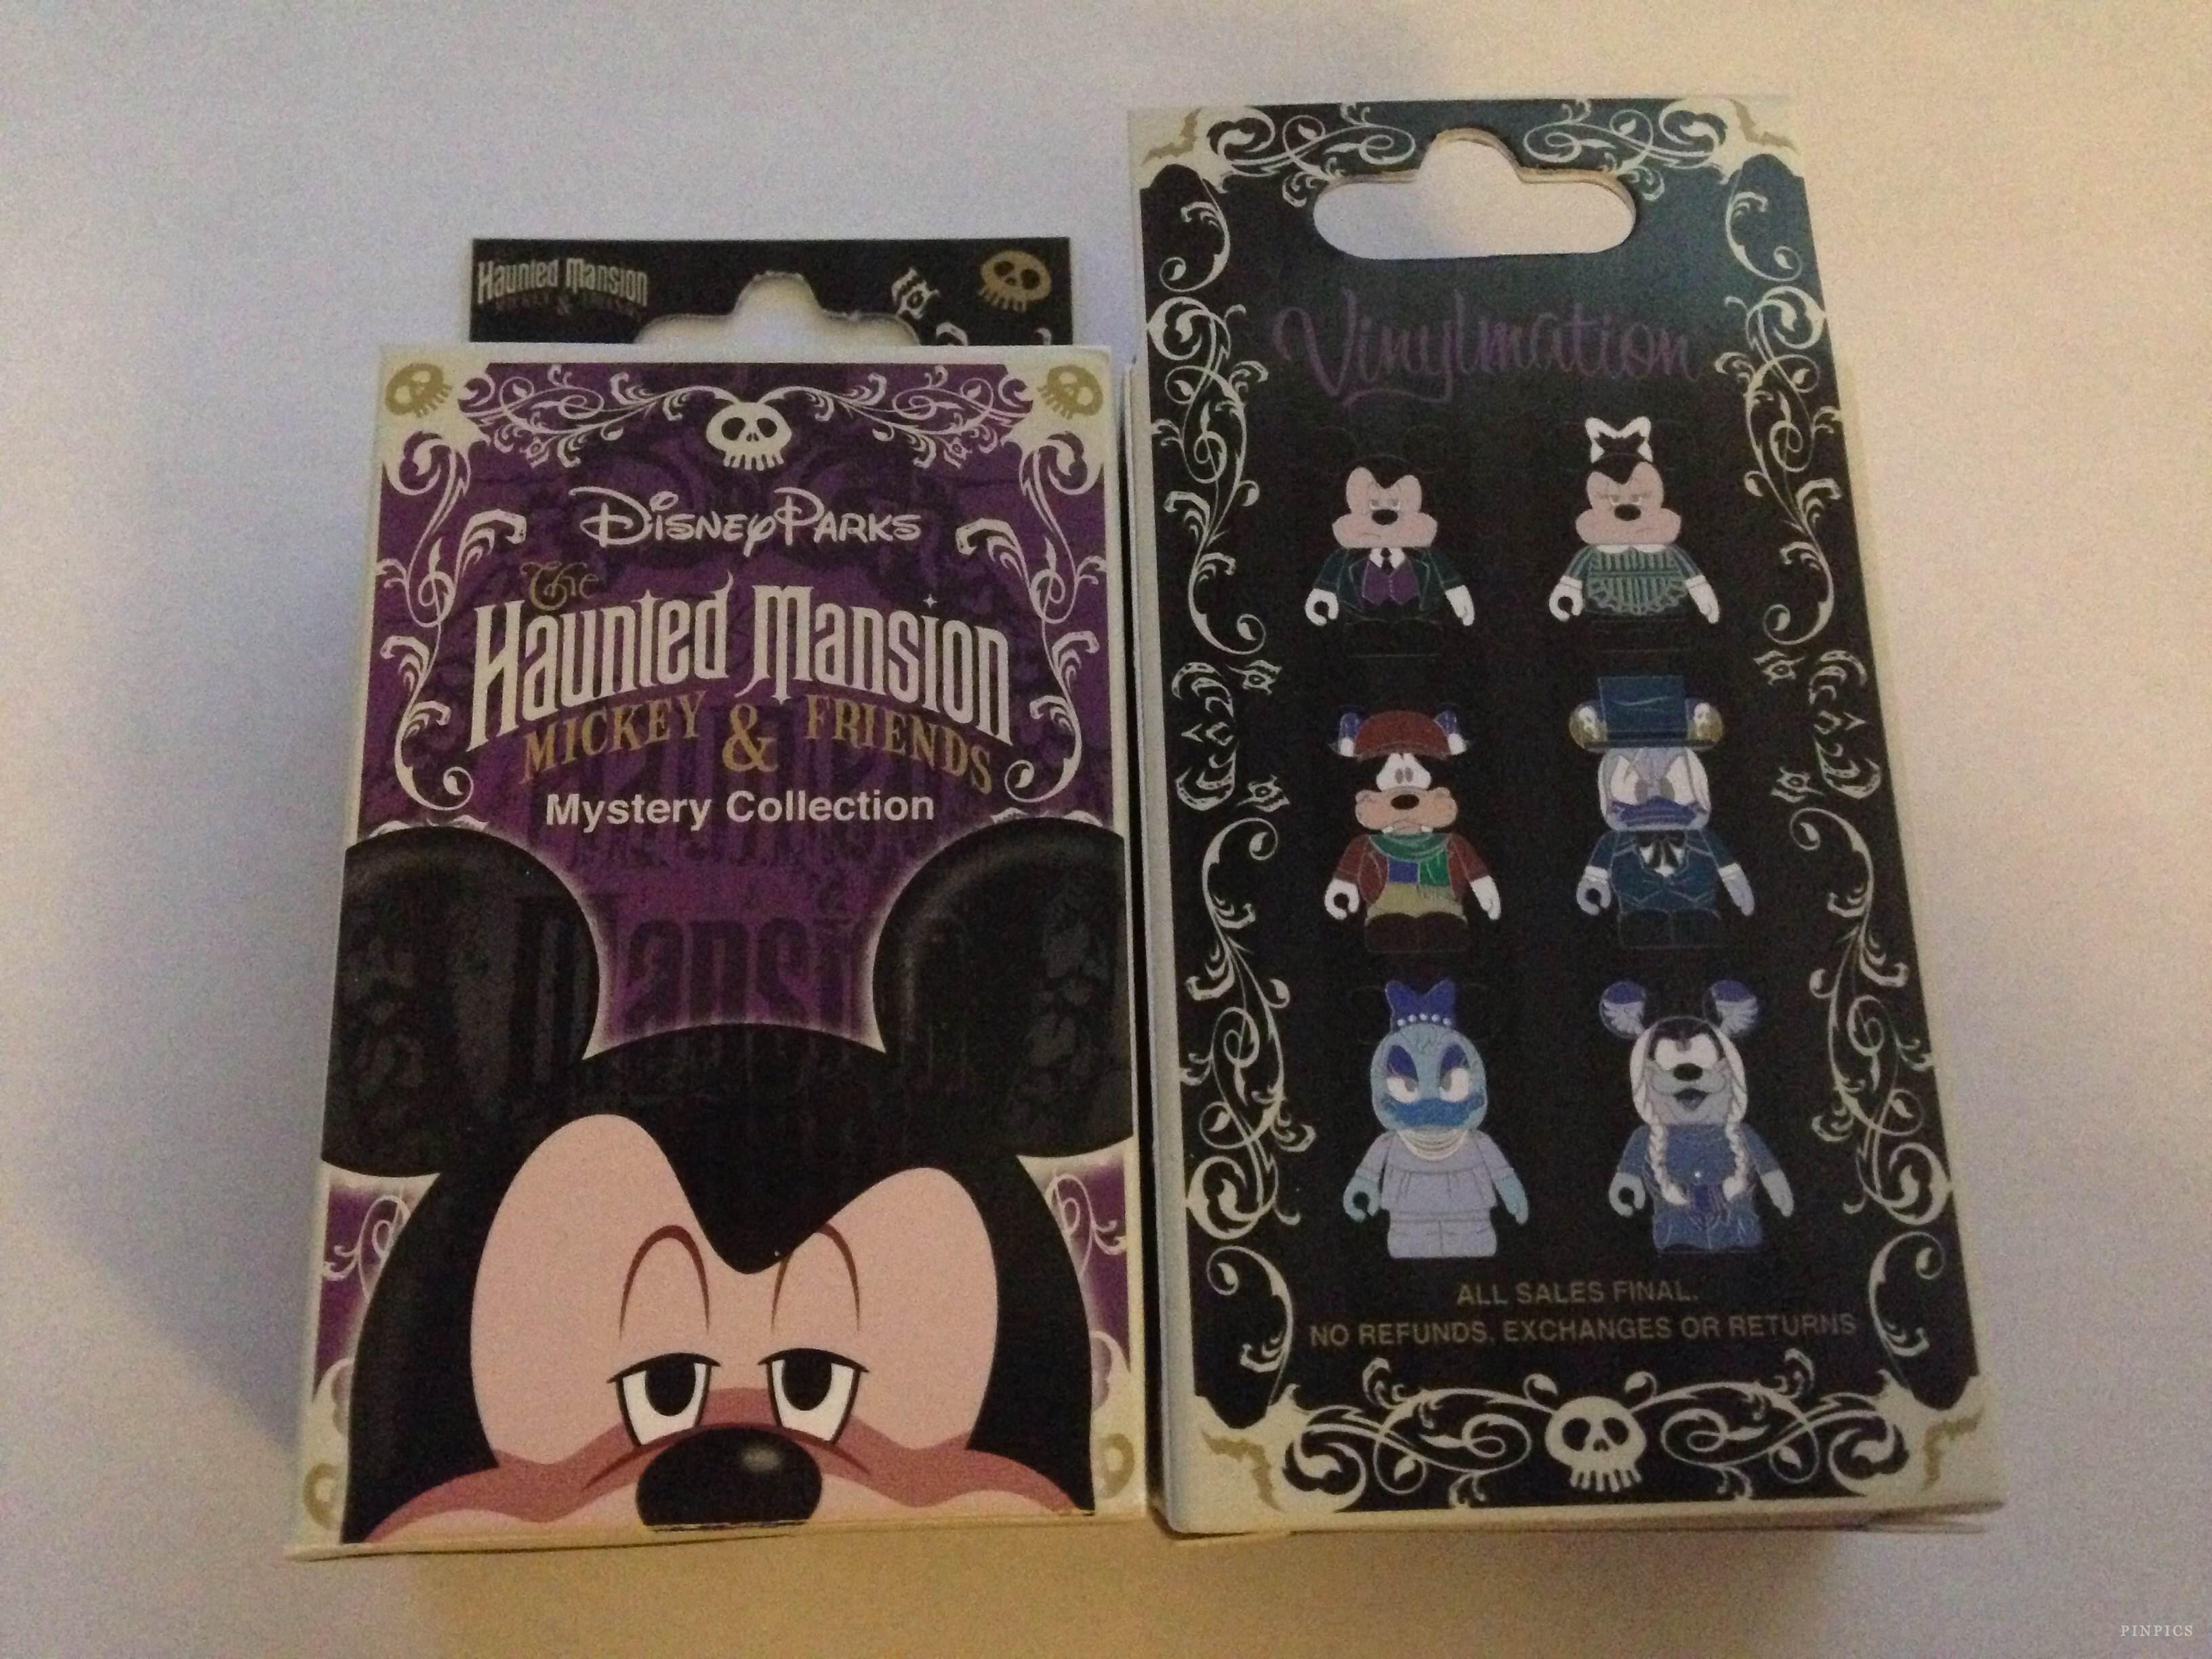 Vinylmation Mystery Collection - Haunted Mansion Mickey & Friends